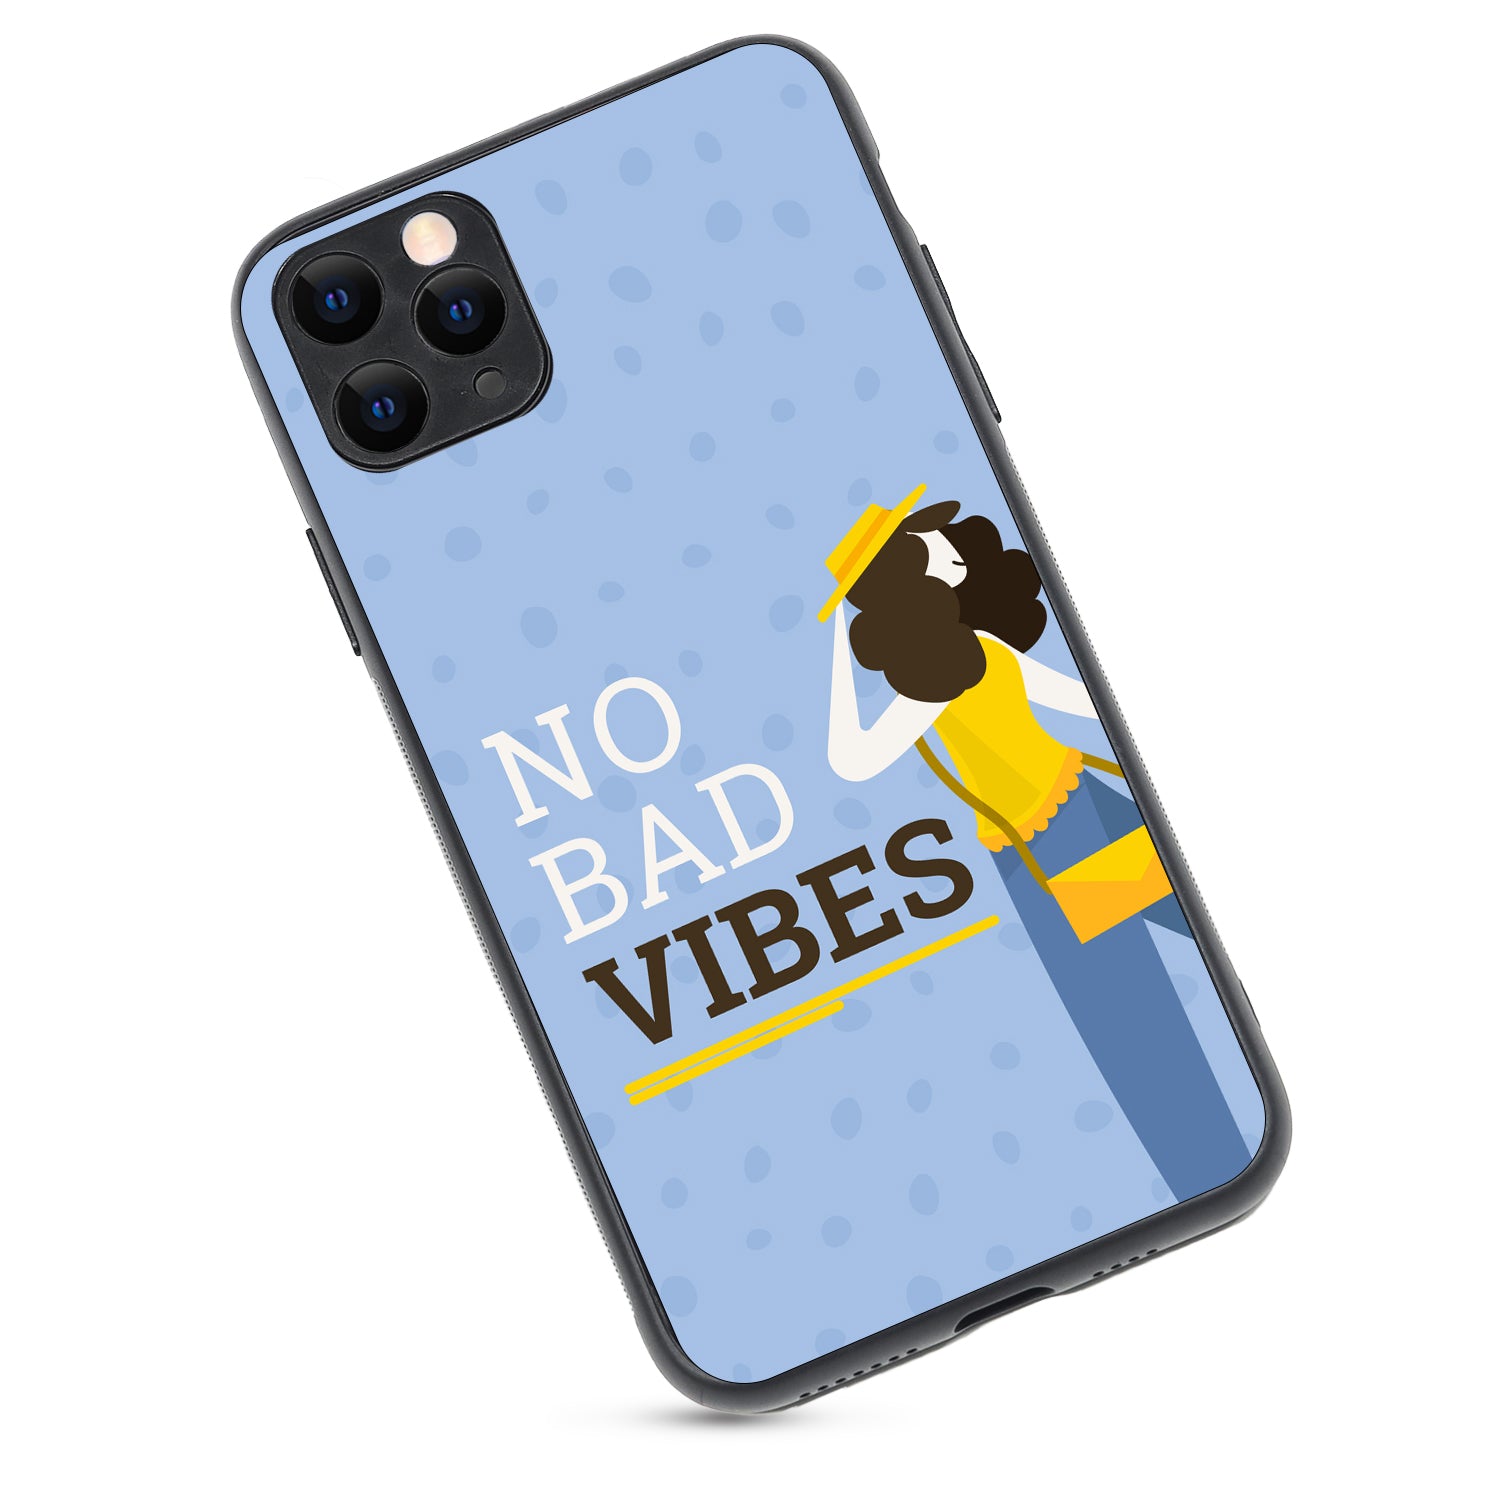 No Bad Vibes Motivational Quotes iPhone 11 Pro Max Case